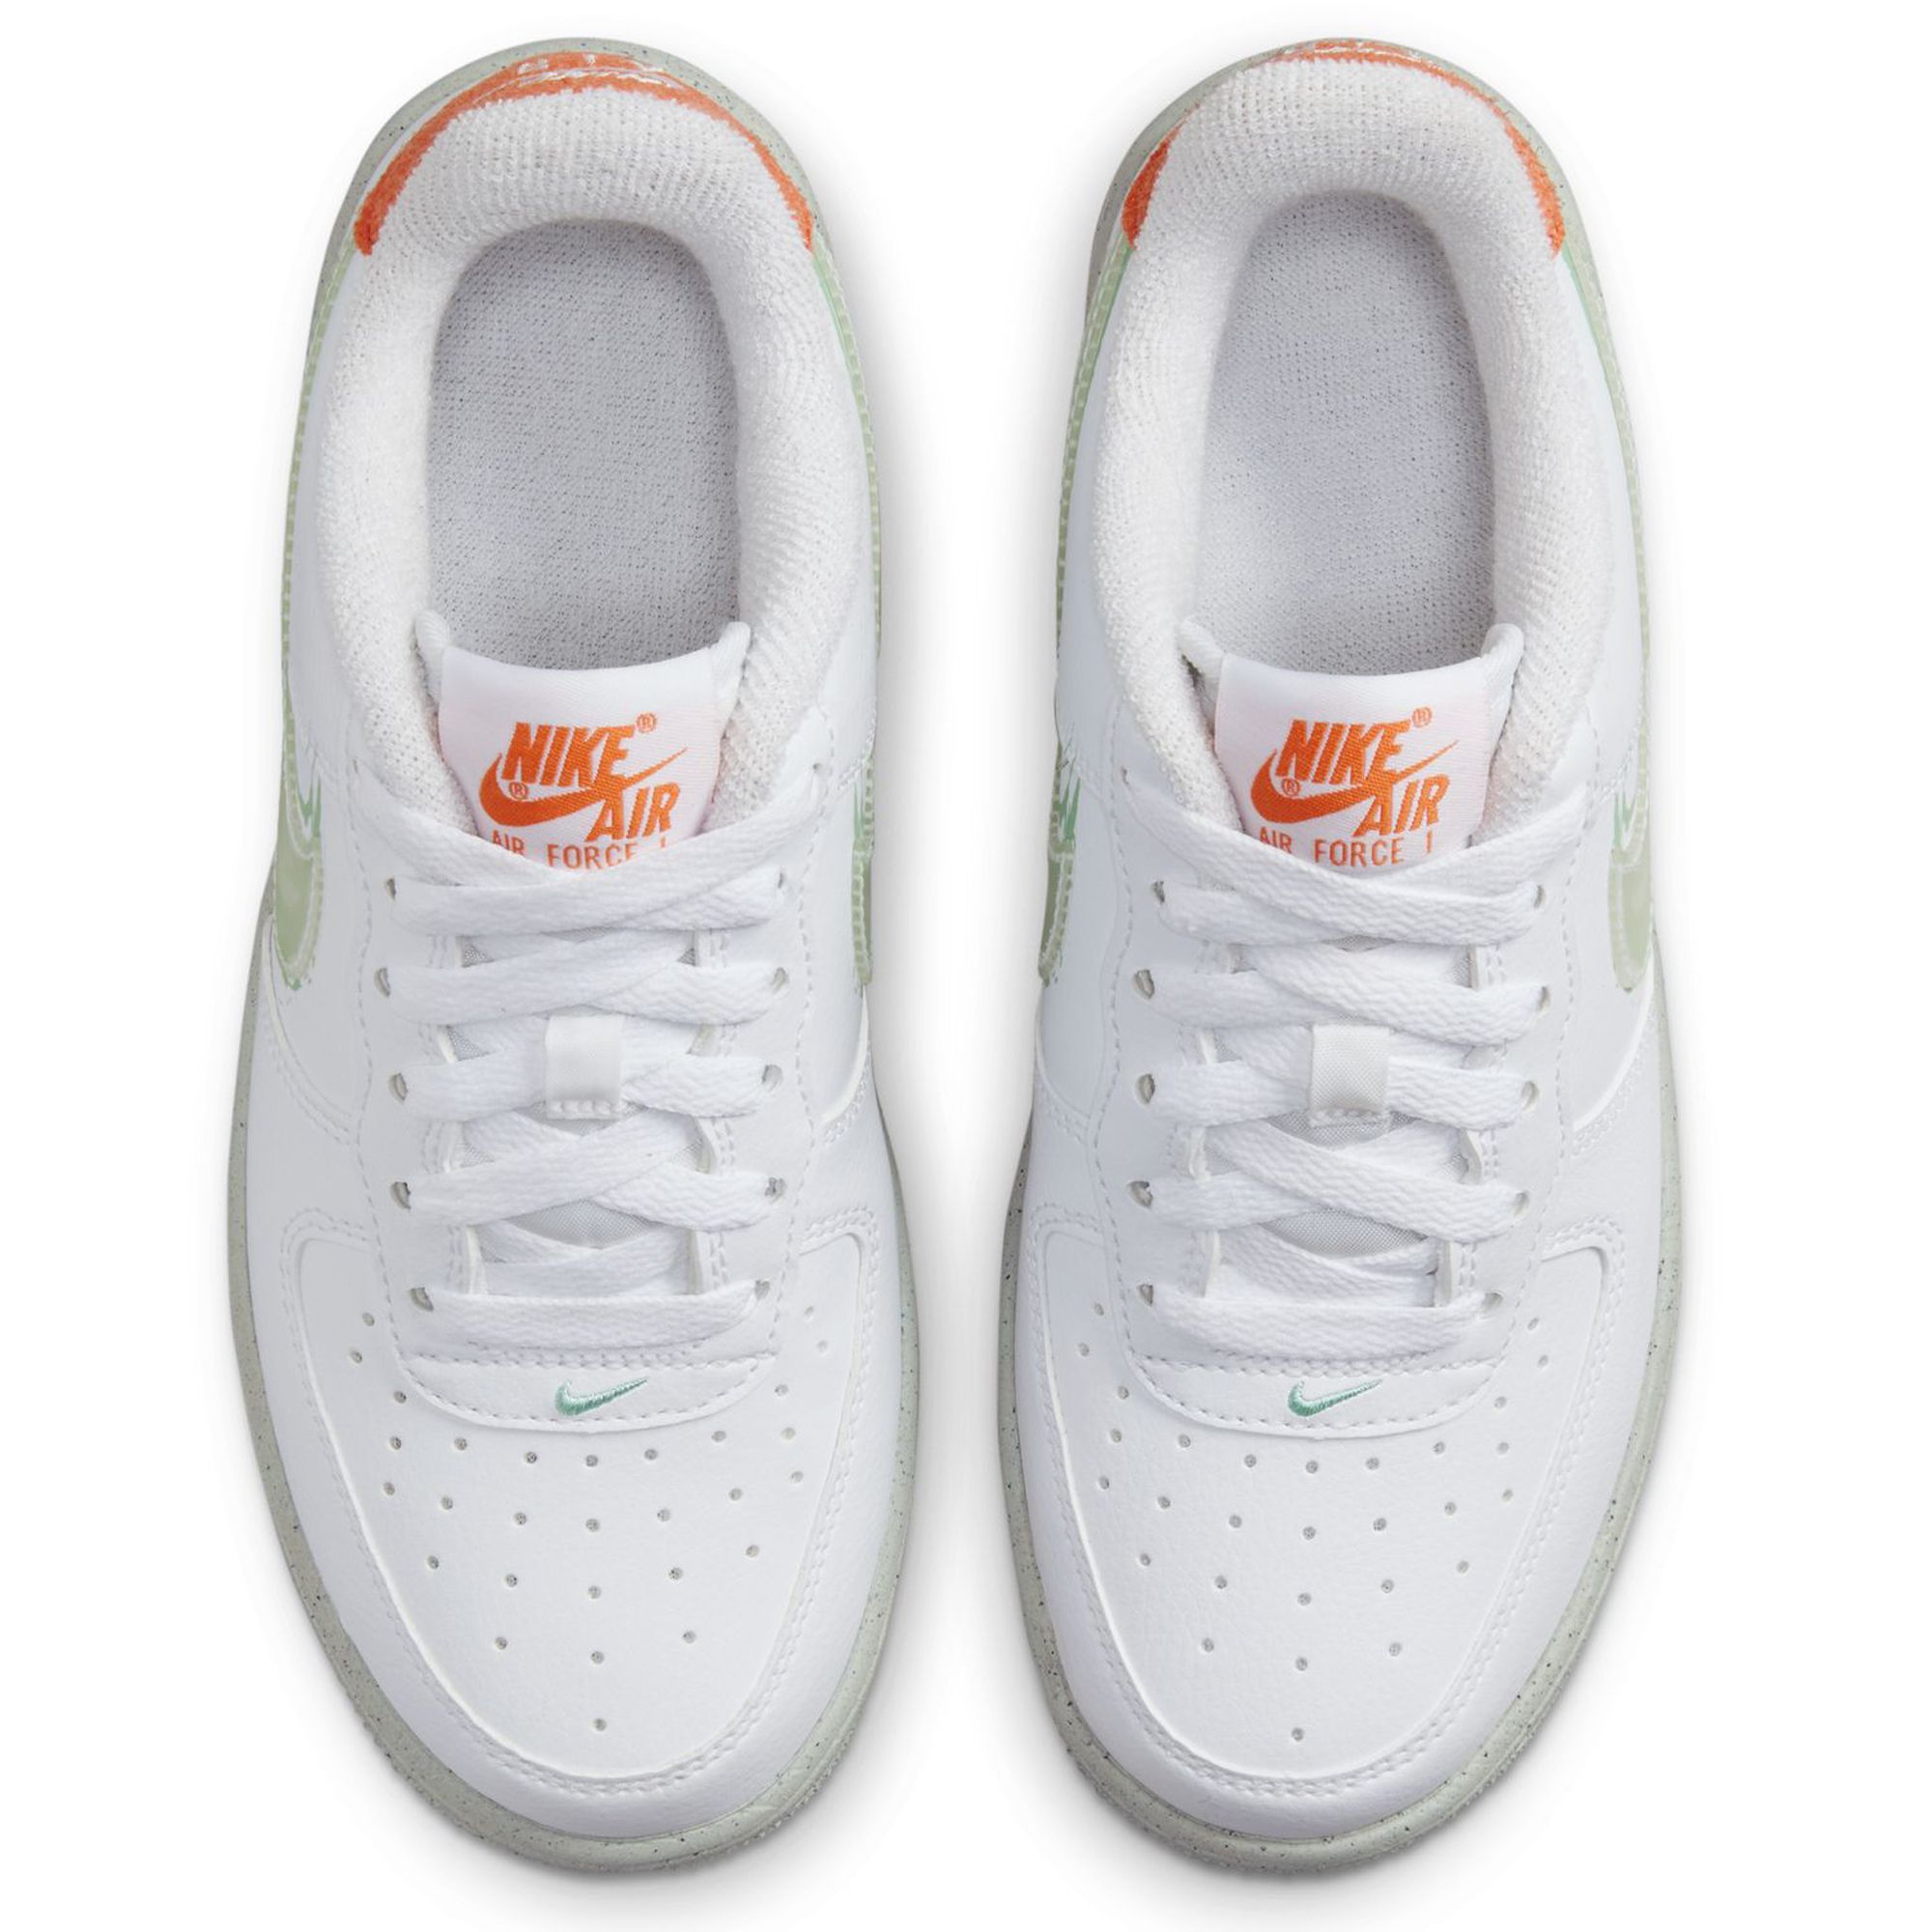 Nike Air Force 1 Crater GS DC9326-001